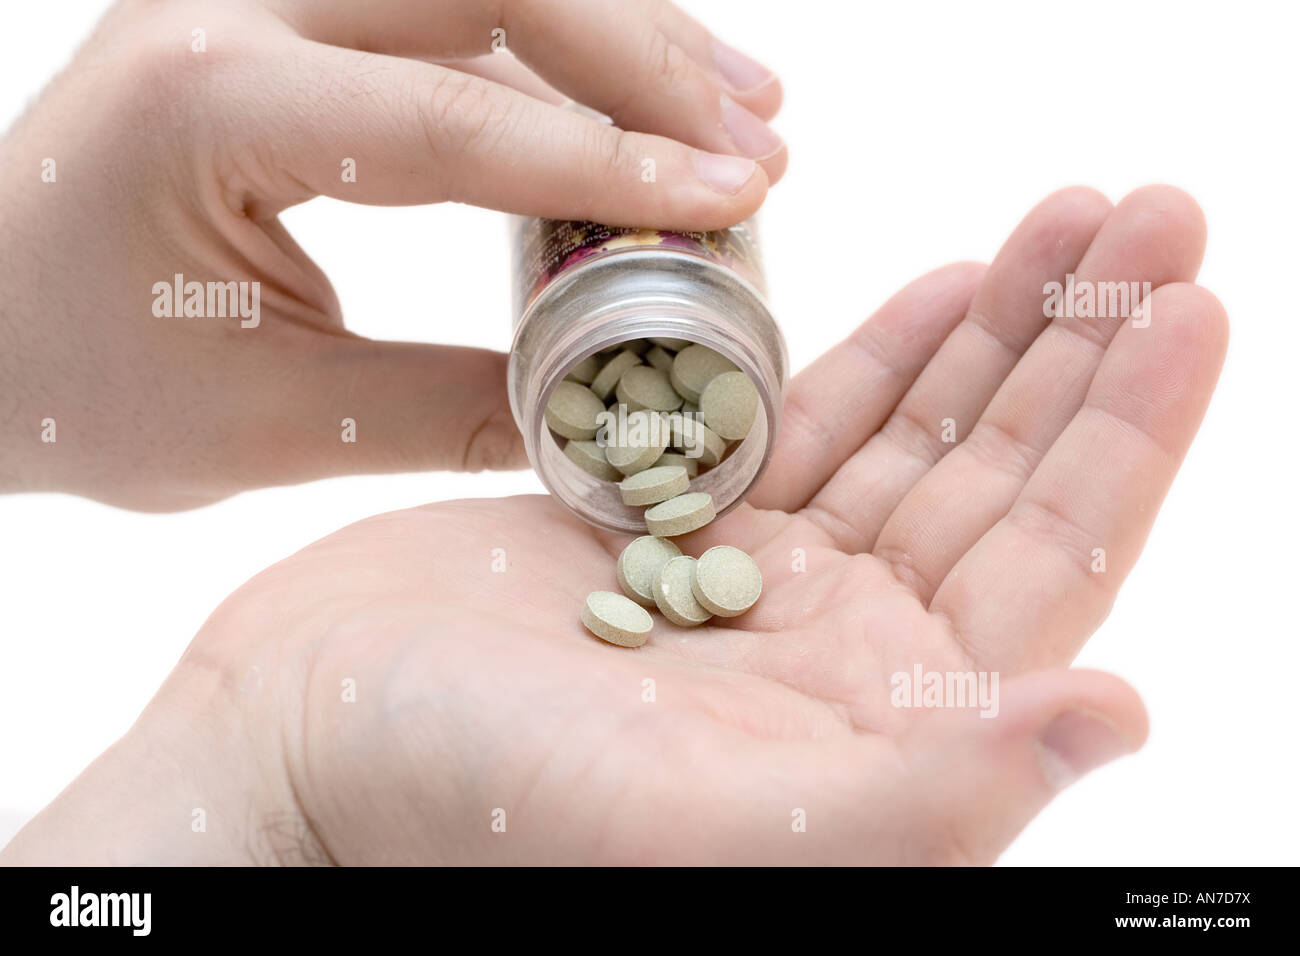 Hand holding pills Banque D'Images